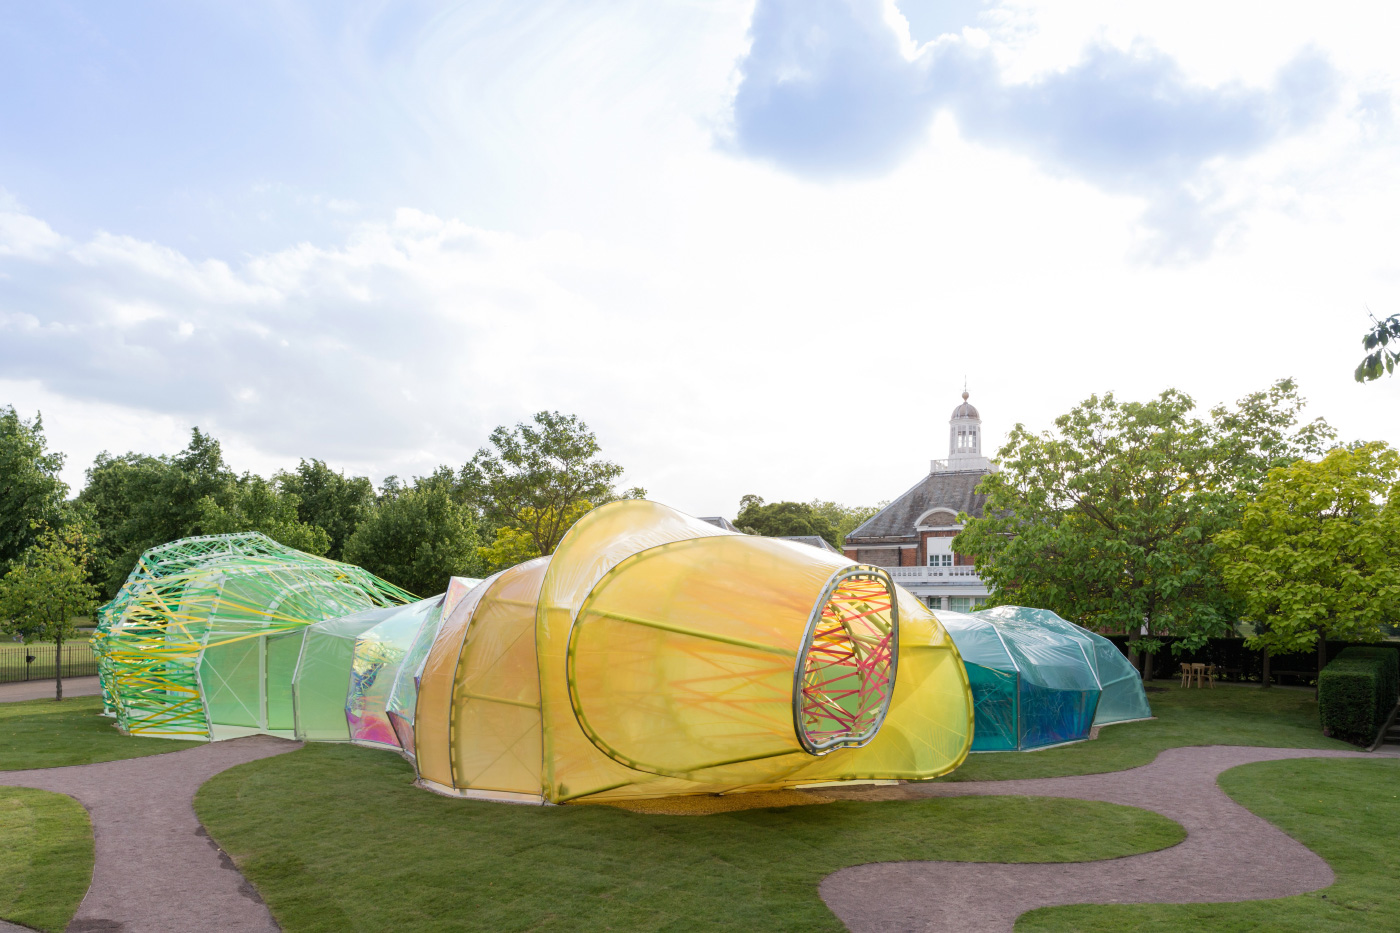 Photo of a large, multicolored fabric installation on an open lawn